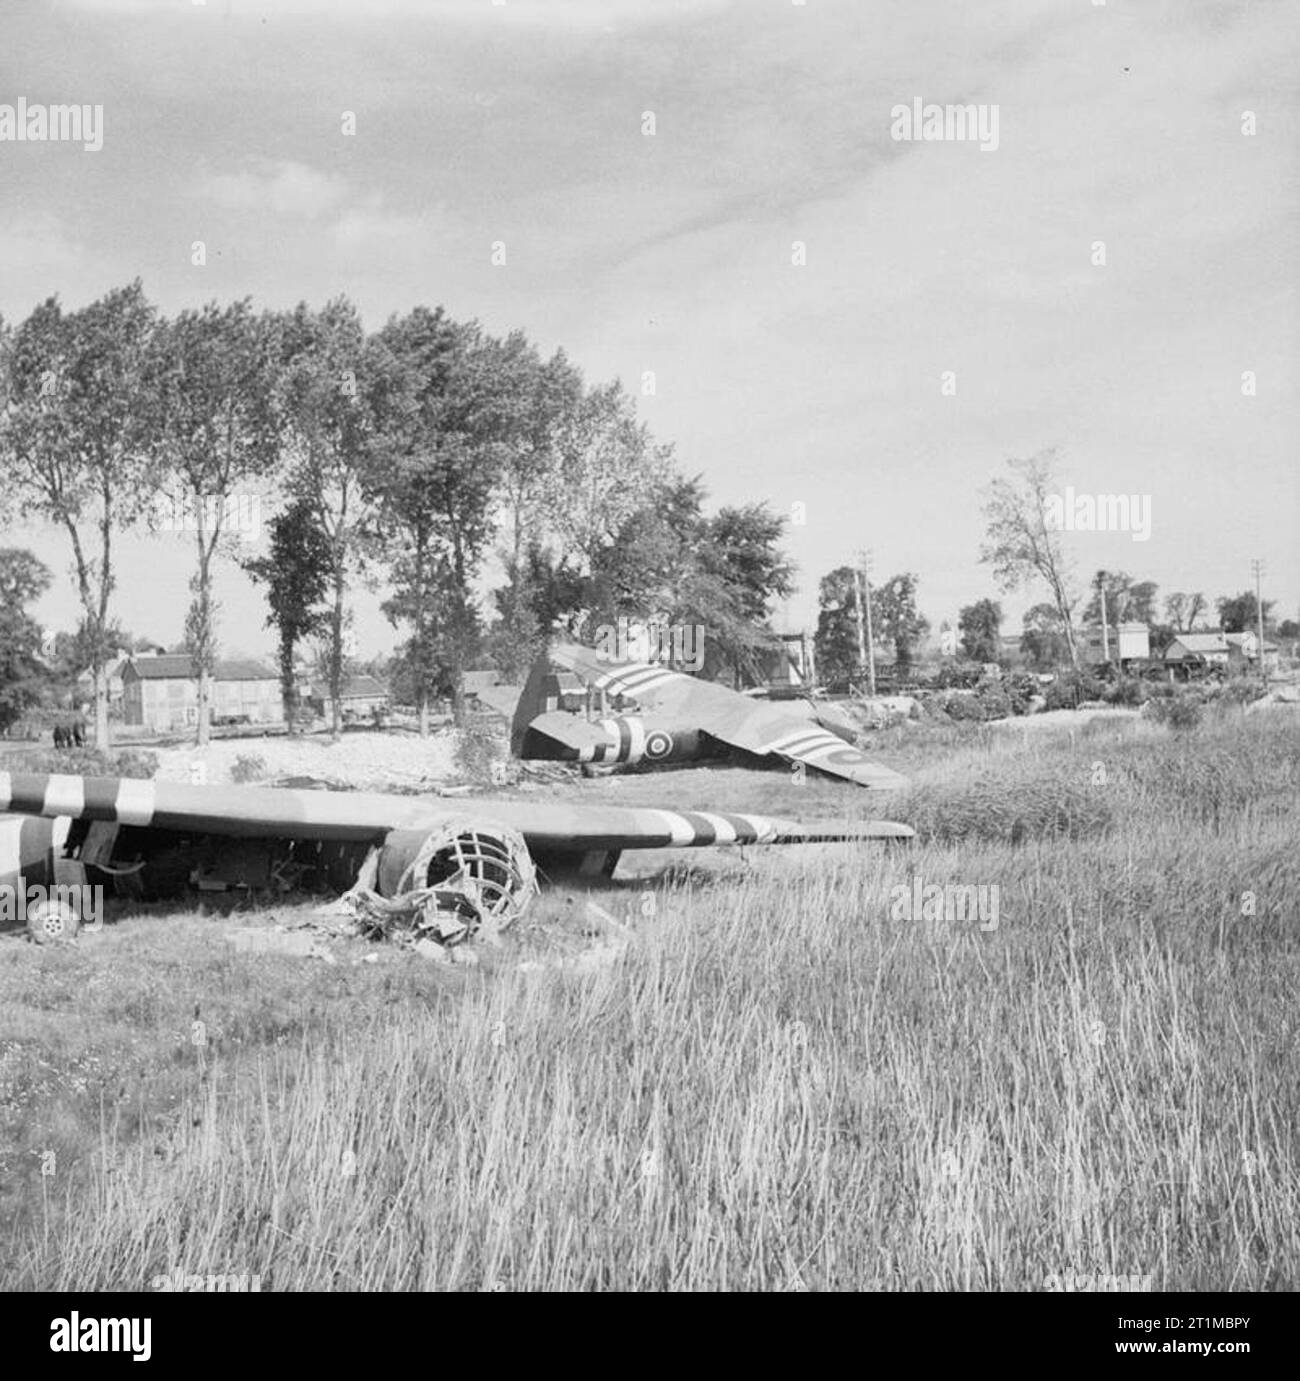 The British Army in the Normandy Campaign 1944 Horsa gliders near the Caen Canal bridge at Benouville, 8 June 1944, part of 6th Airborne Division's 'coup de main' force, carrying men of 'D' and 'B' Company, 2nd Battalion Oxfordshire and Buckinghamshire Light Infantry, which captured the bridges over the Orne River and Caen Canal in the early hours of D-Day. In the foreground is glider No. 93, which carried Lieutenant David Wood's platoon, with behind, glider No. 91, which carried the force commander, Major John Howard, and Lieutenant Den Brotheridge's platoon. Stock Photo